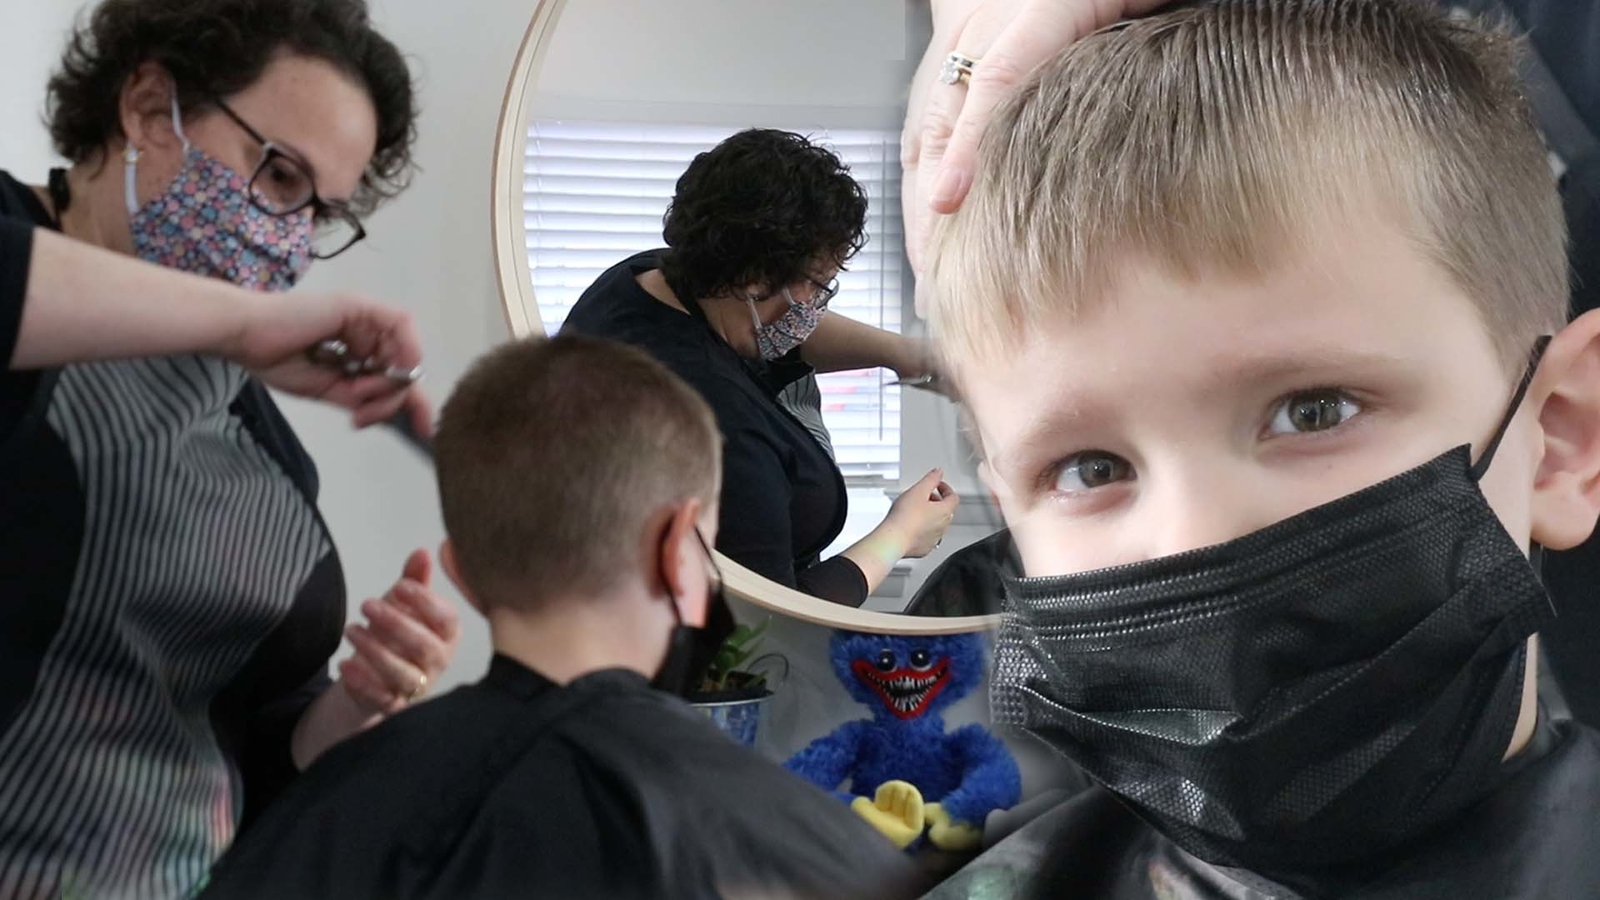  Hairapy is a sensory-friendly salon offering haircuts to kids with special needs 